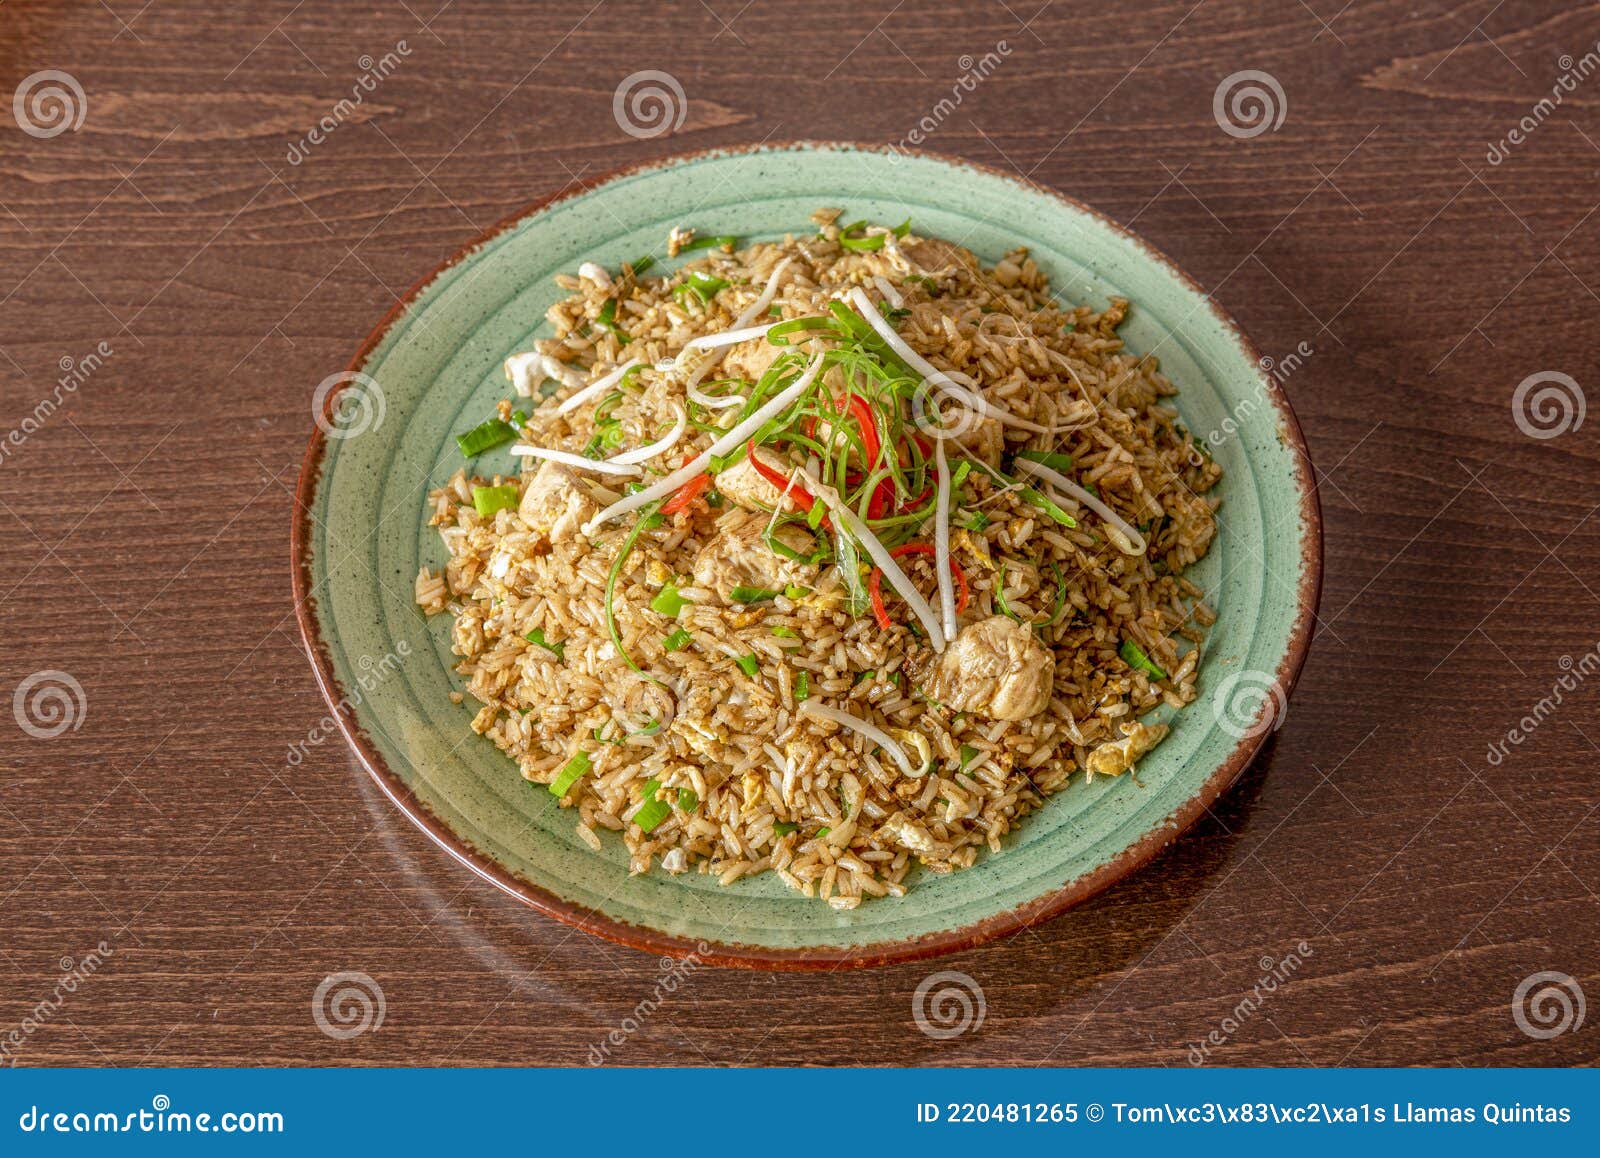 chaufa rice with vegetables, bean sprouts, chicken and pieces of fried egg